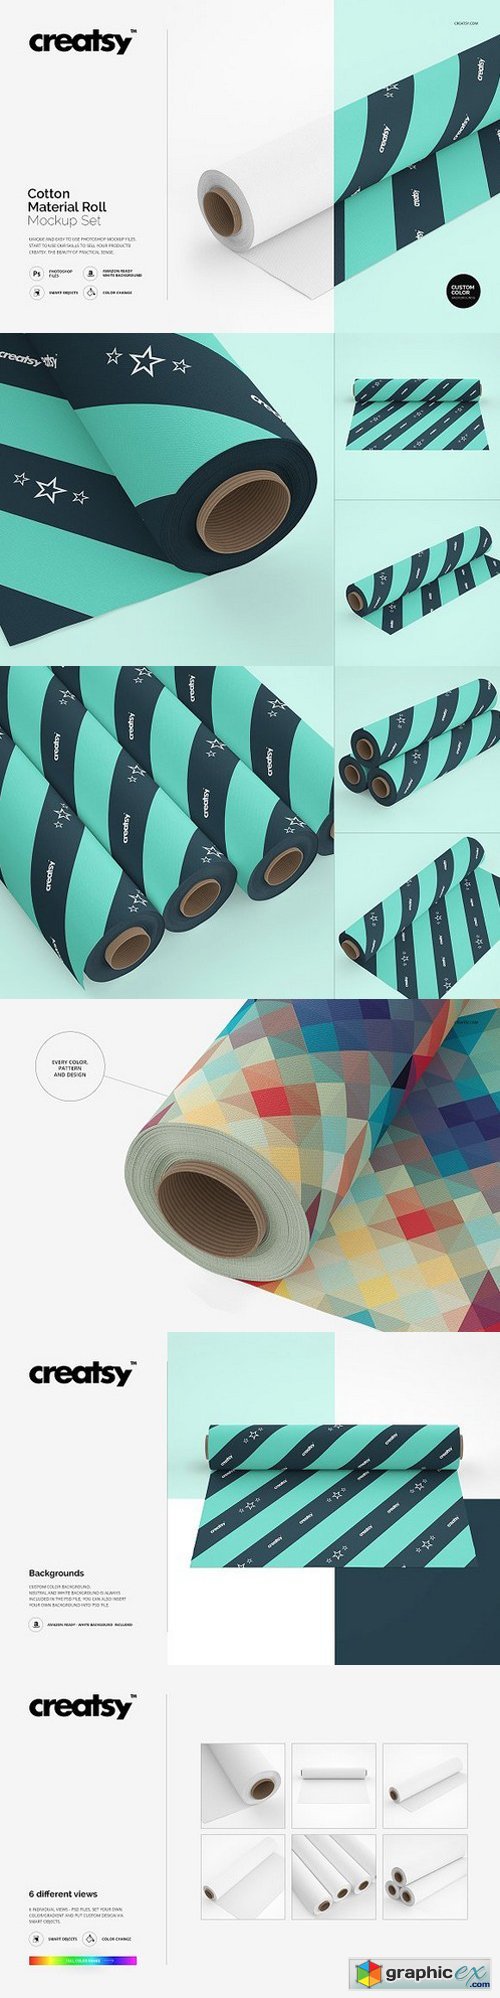 Cotton Material Roll Mockup Set